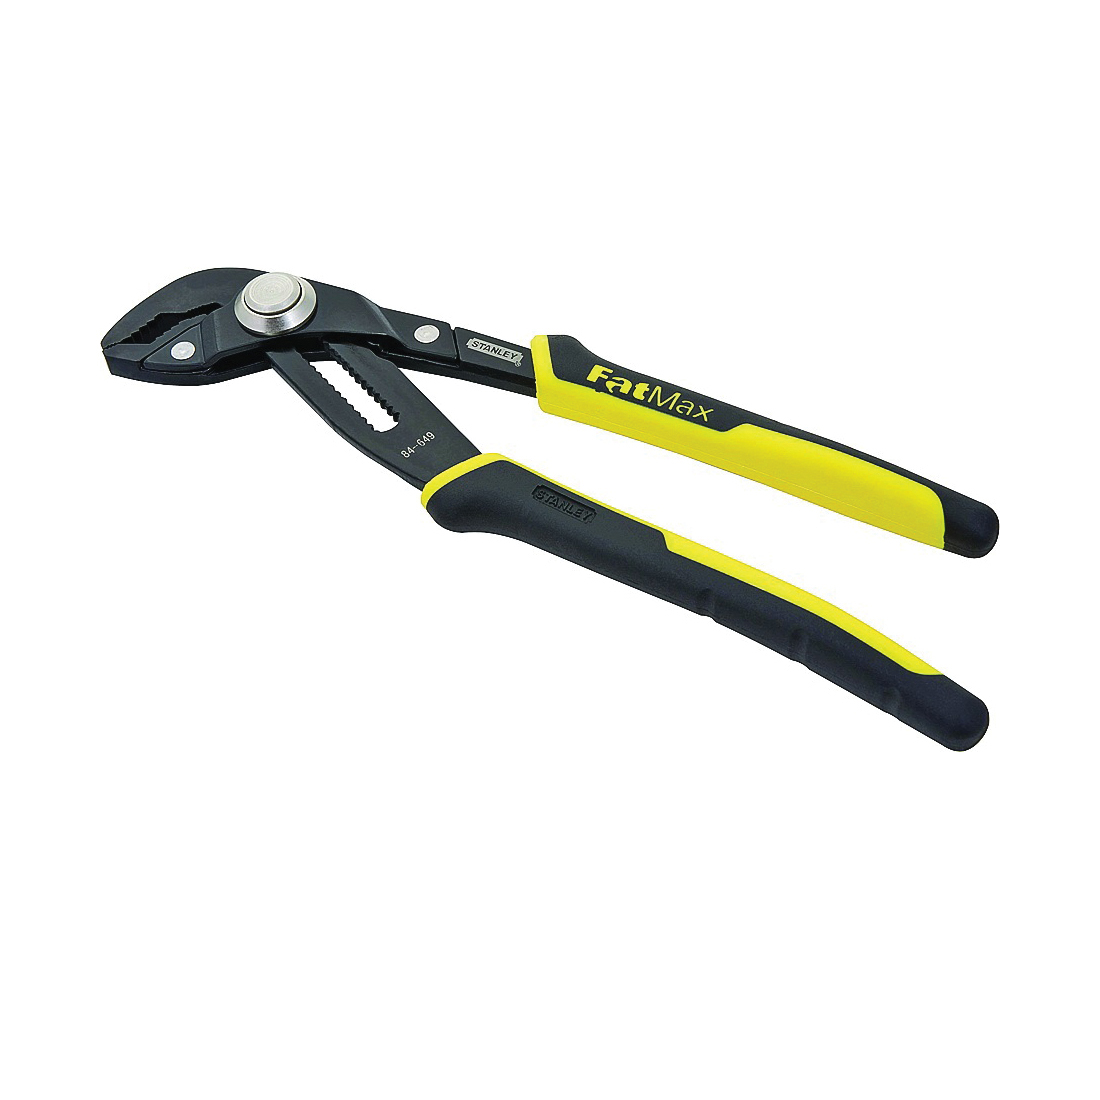 84-649 Joint Plier, 12 in OAL, 2-3/4 in Jaw Opening, Black/Yellow Handle, Ergonomic Handle, 7/8 in W Jaw